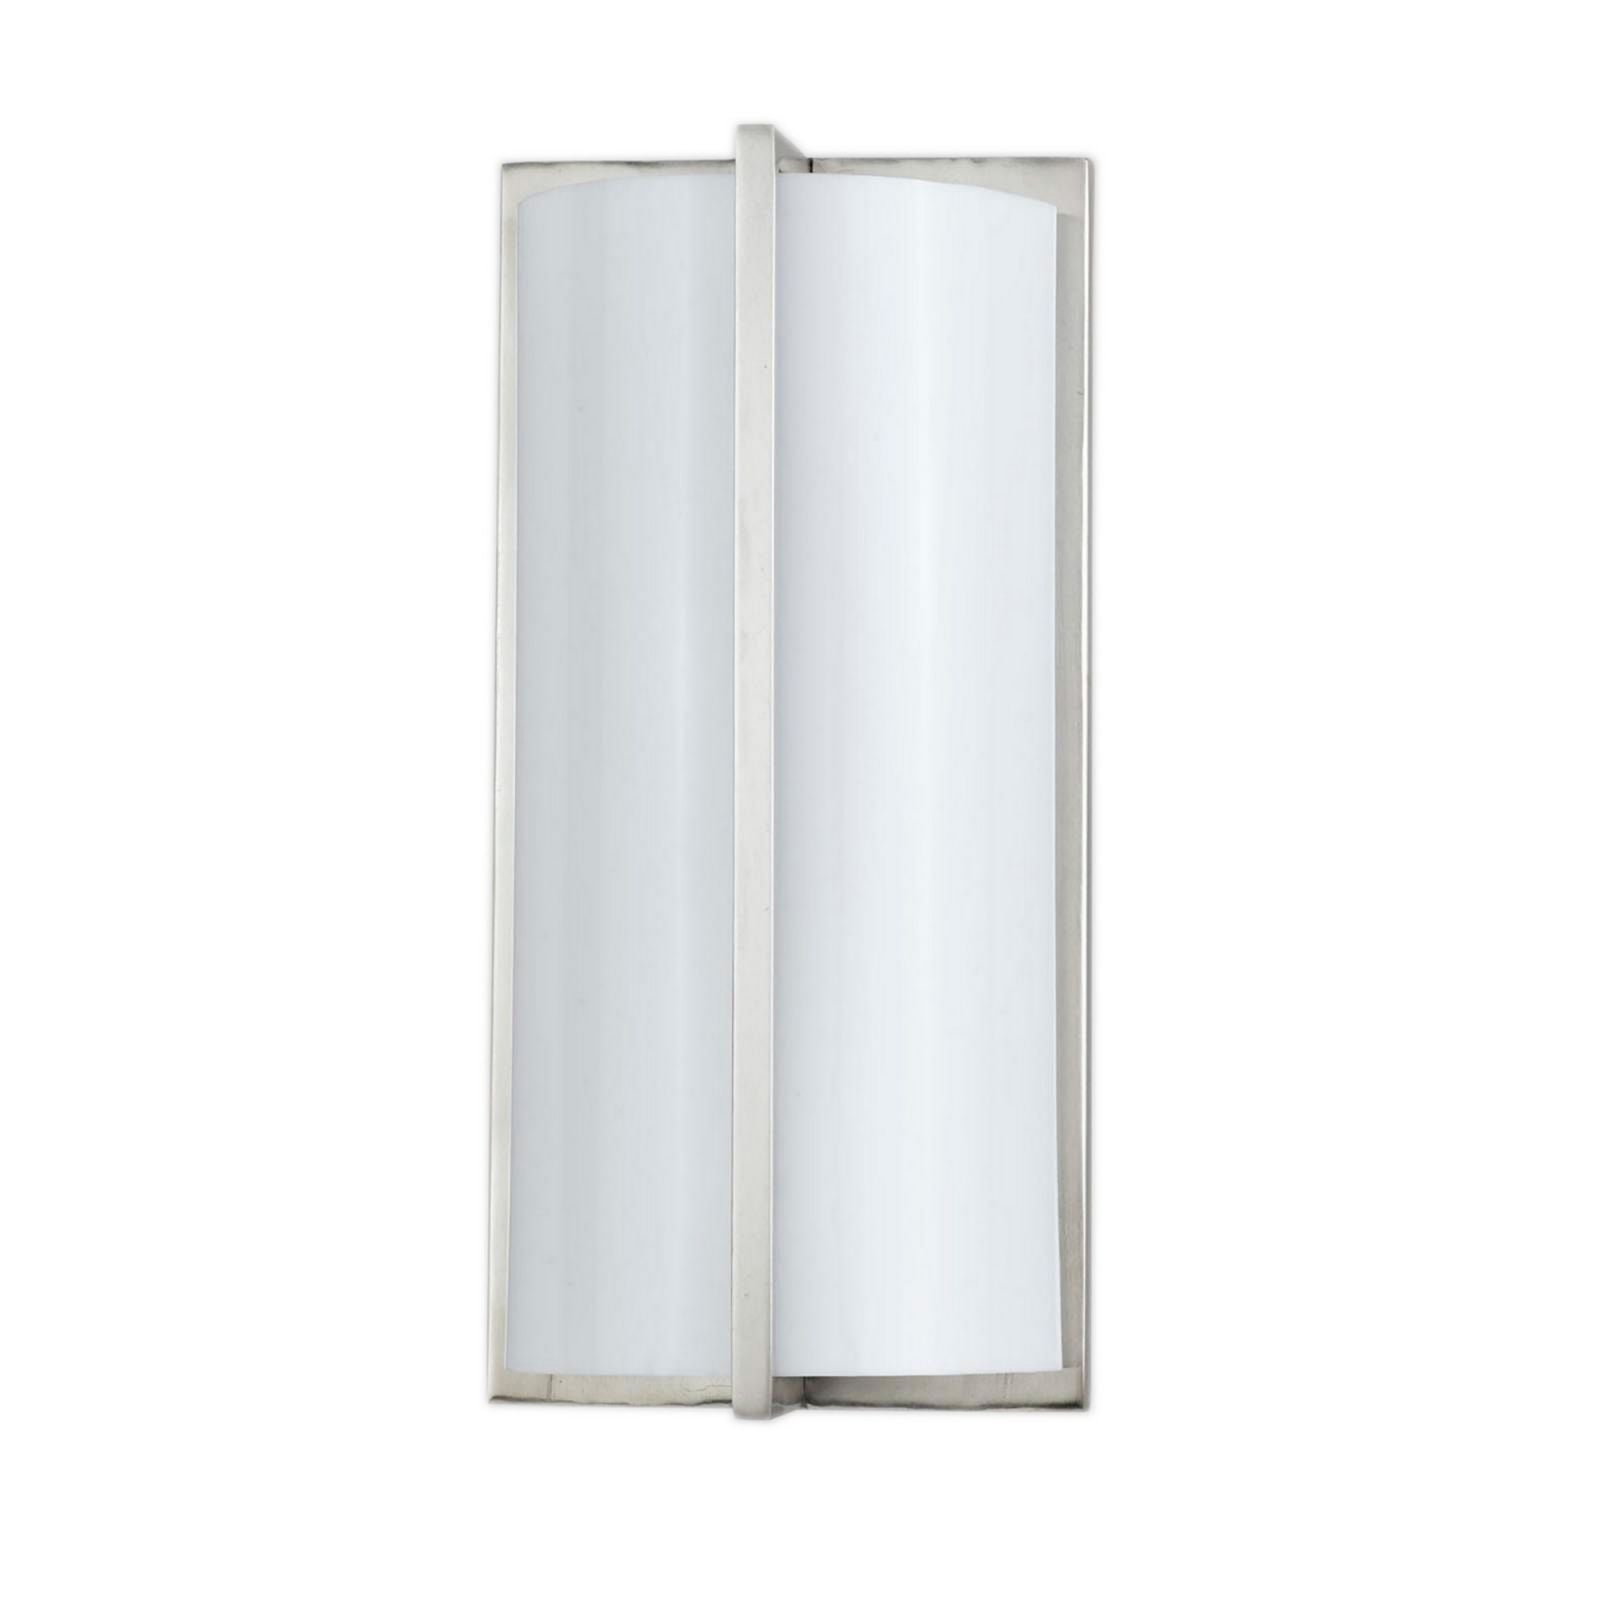 Cylindrical Shape Plc Wall Lamp With 3D Design, Set Of 4, Silver And White By Benzara